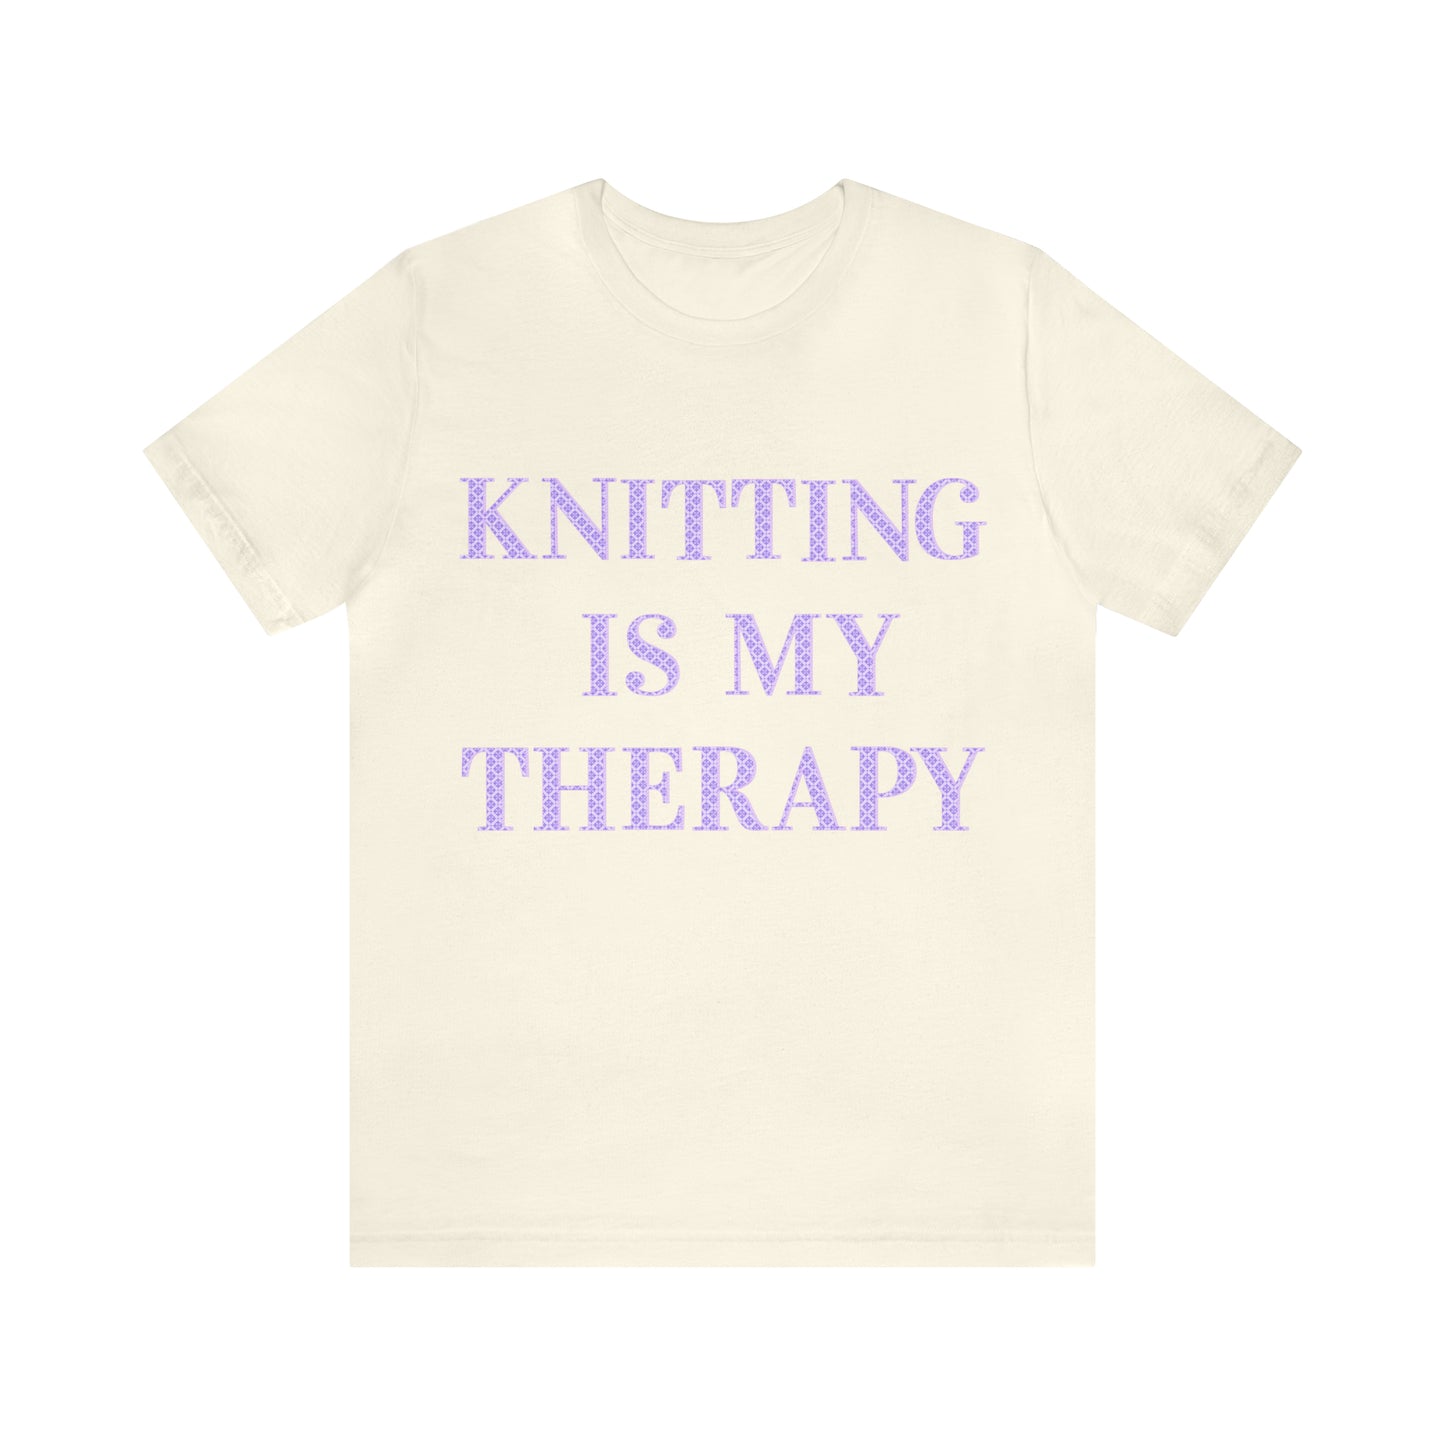 Knitting Is My Therapy- Adult, Regular Fit, Soft Cotton, T-shirt